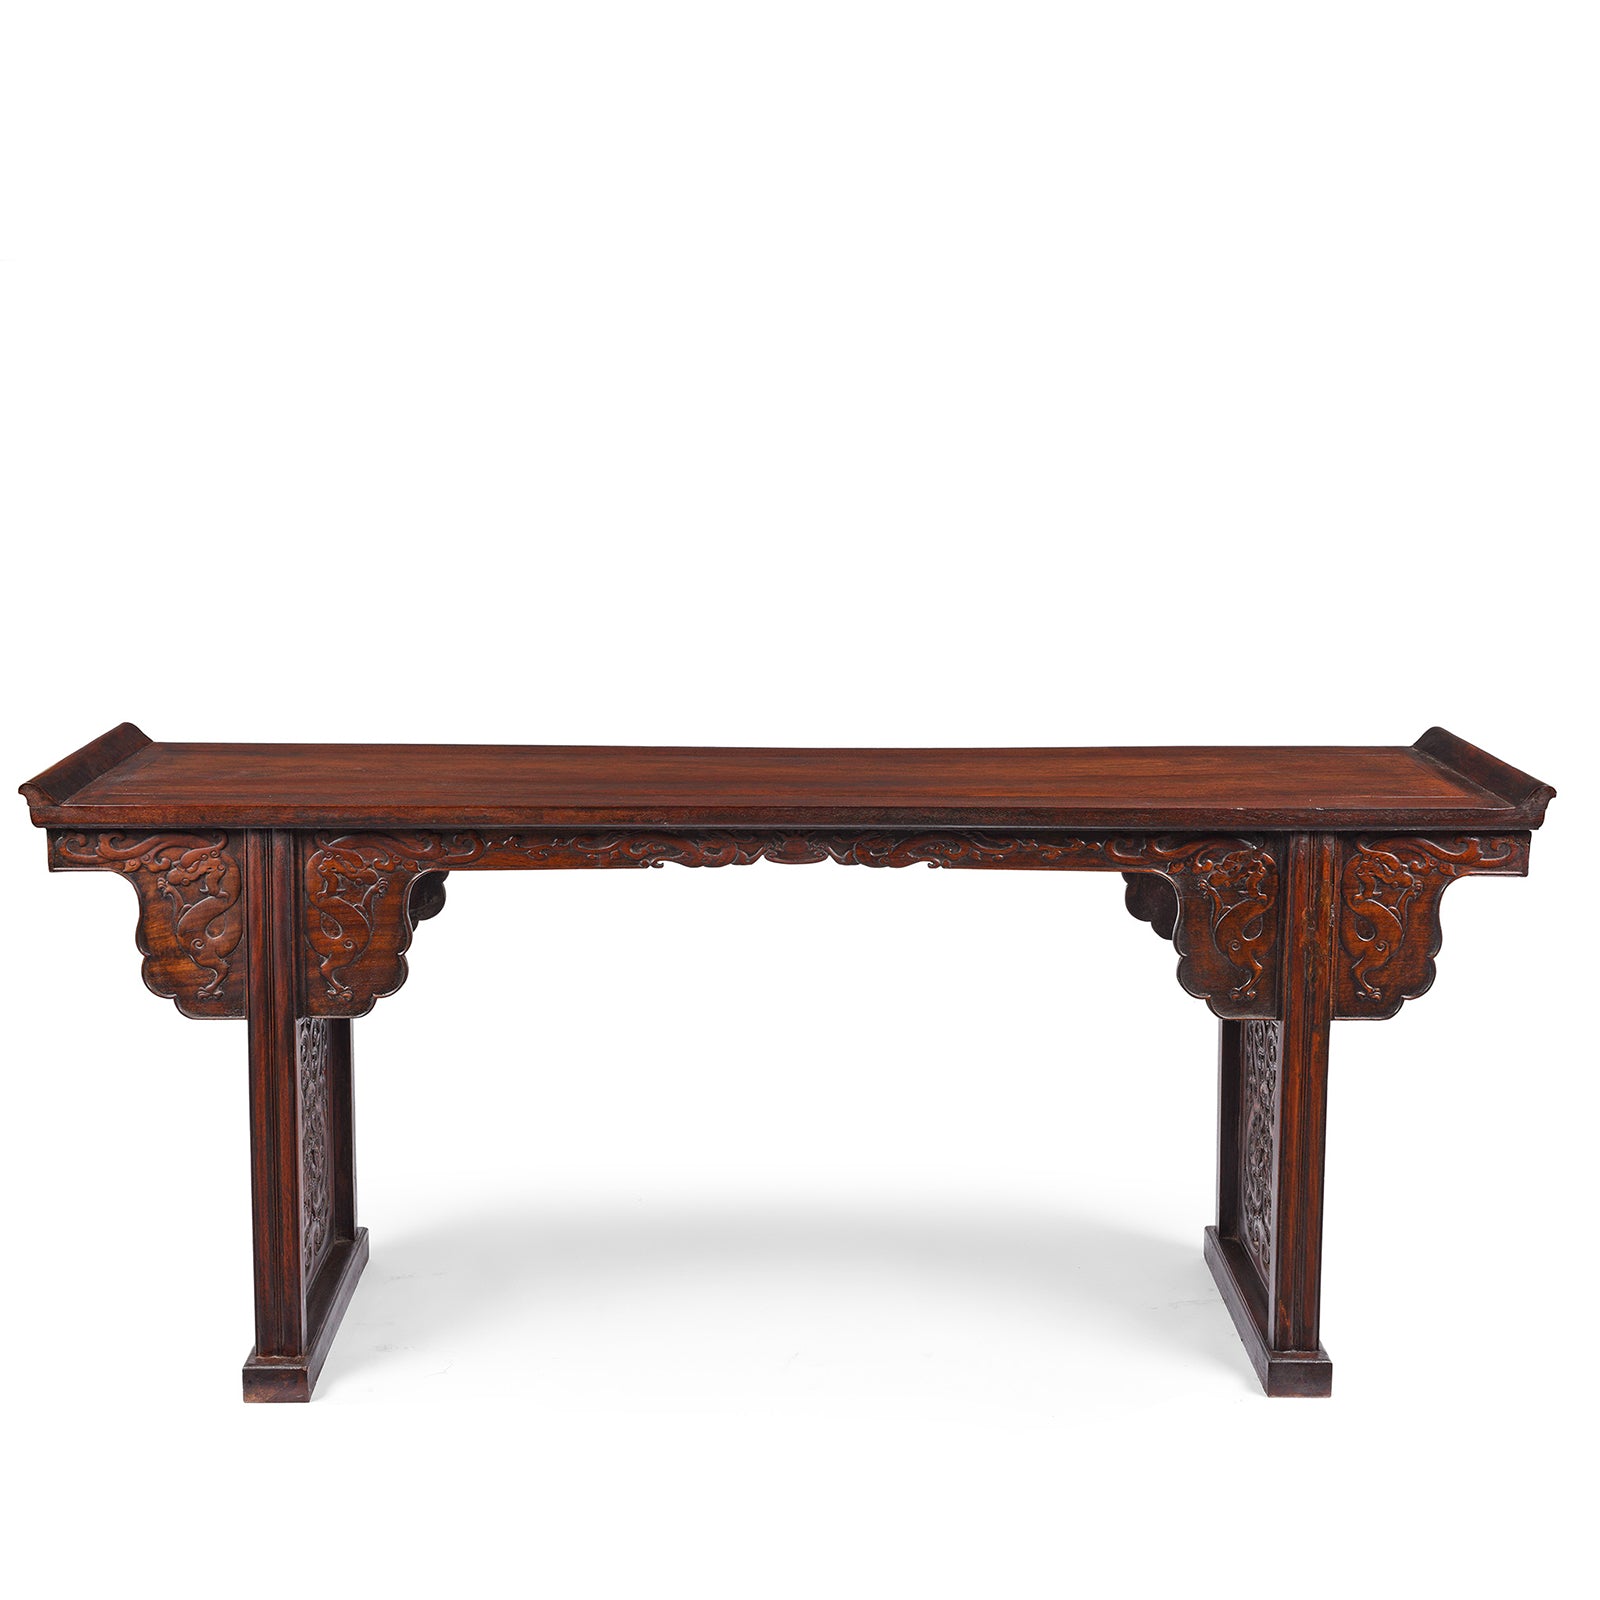 Reproduction Chinese Rosewood Altar Table | Indigo Antiques